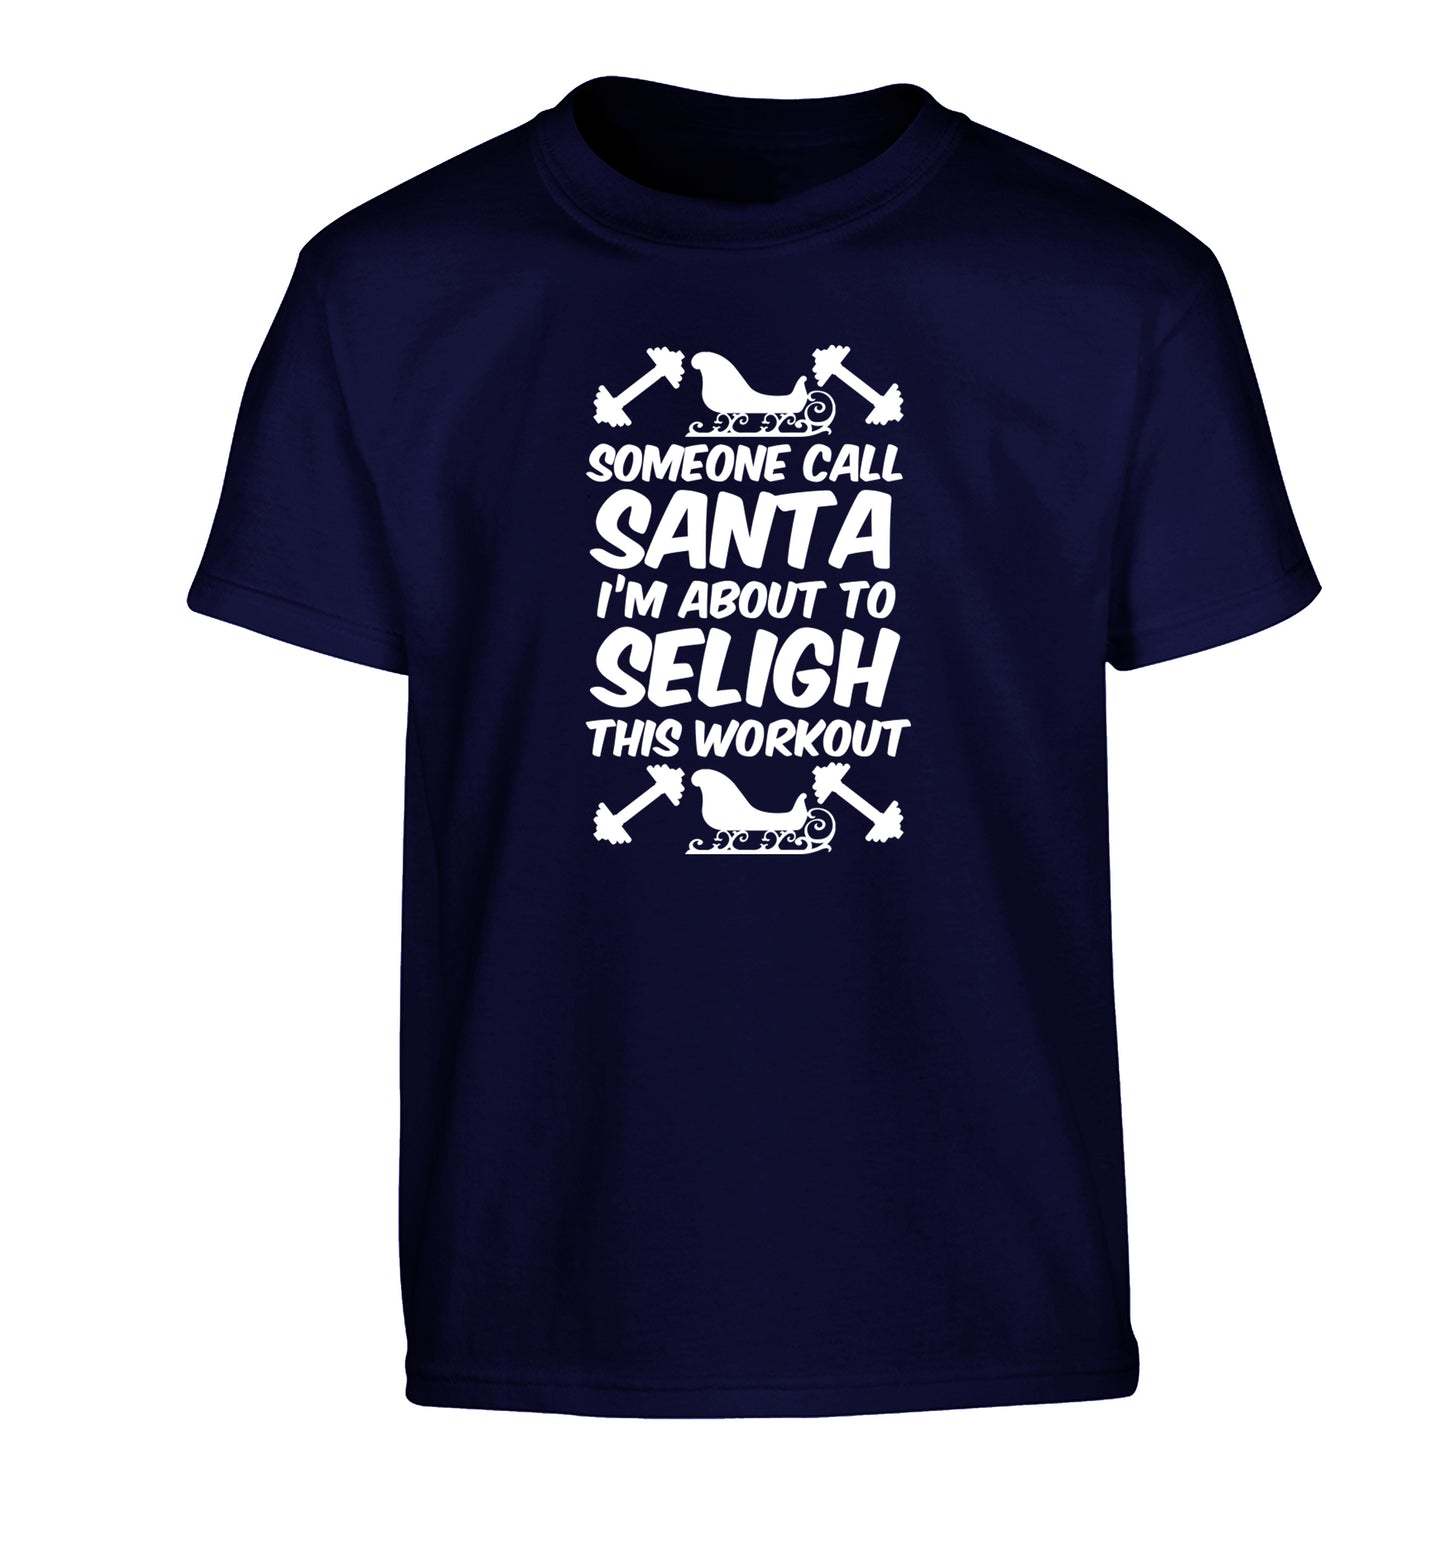 Someone call santa, I'm about to sleigh this workout Children's navy Tshirt 12-14 Years